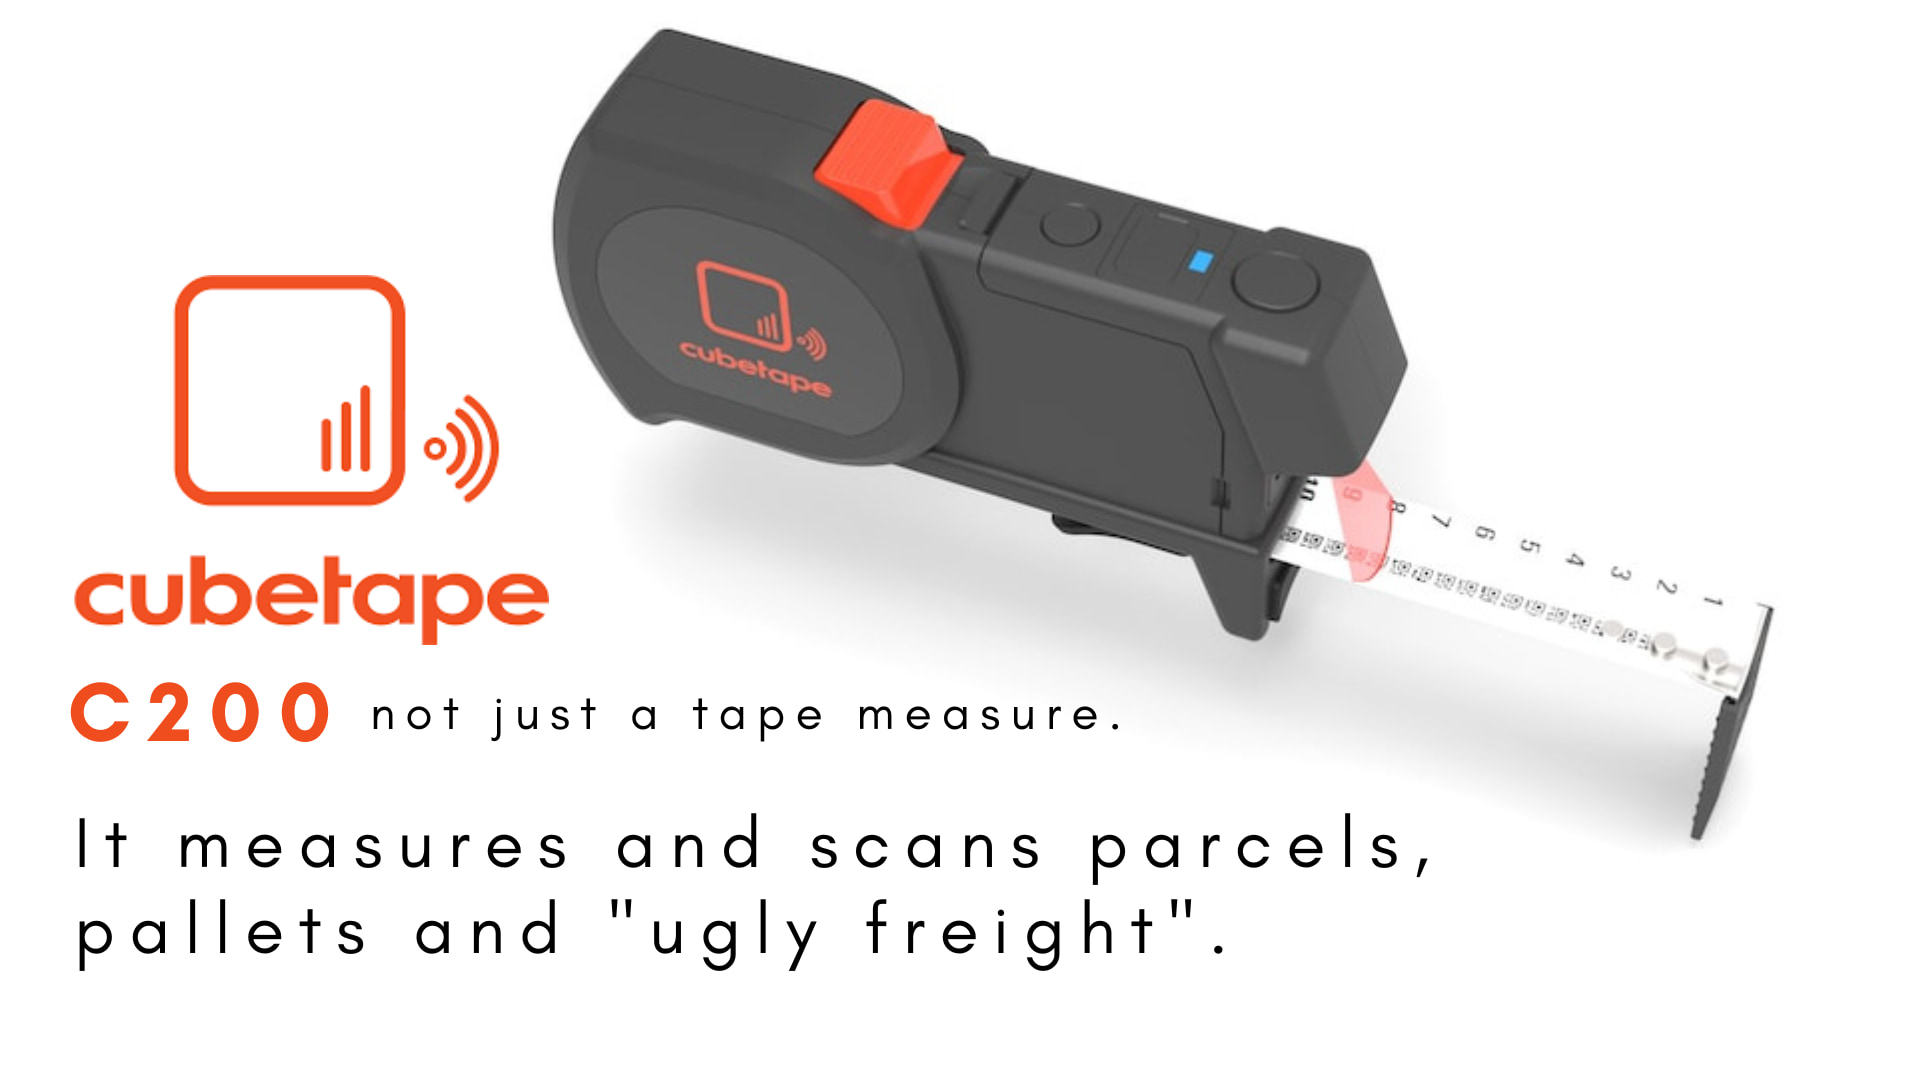 Cubetape - 2 in 1 solution, measuring and scanning